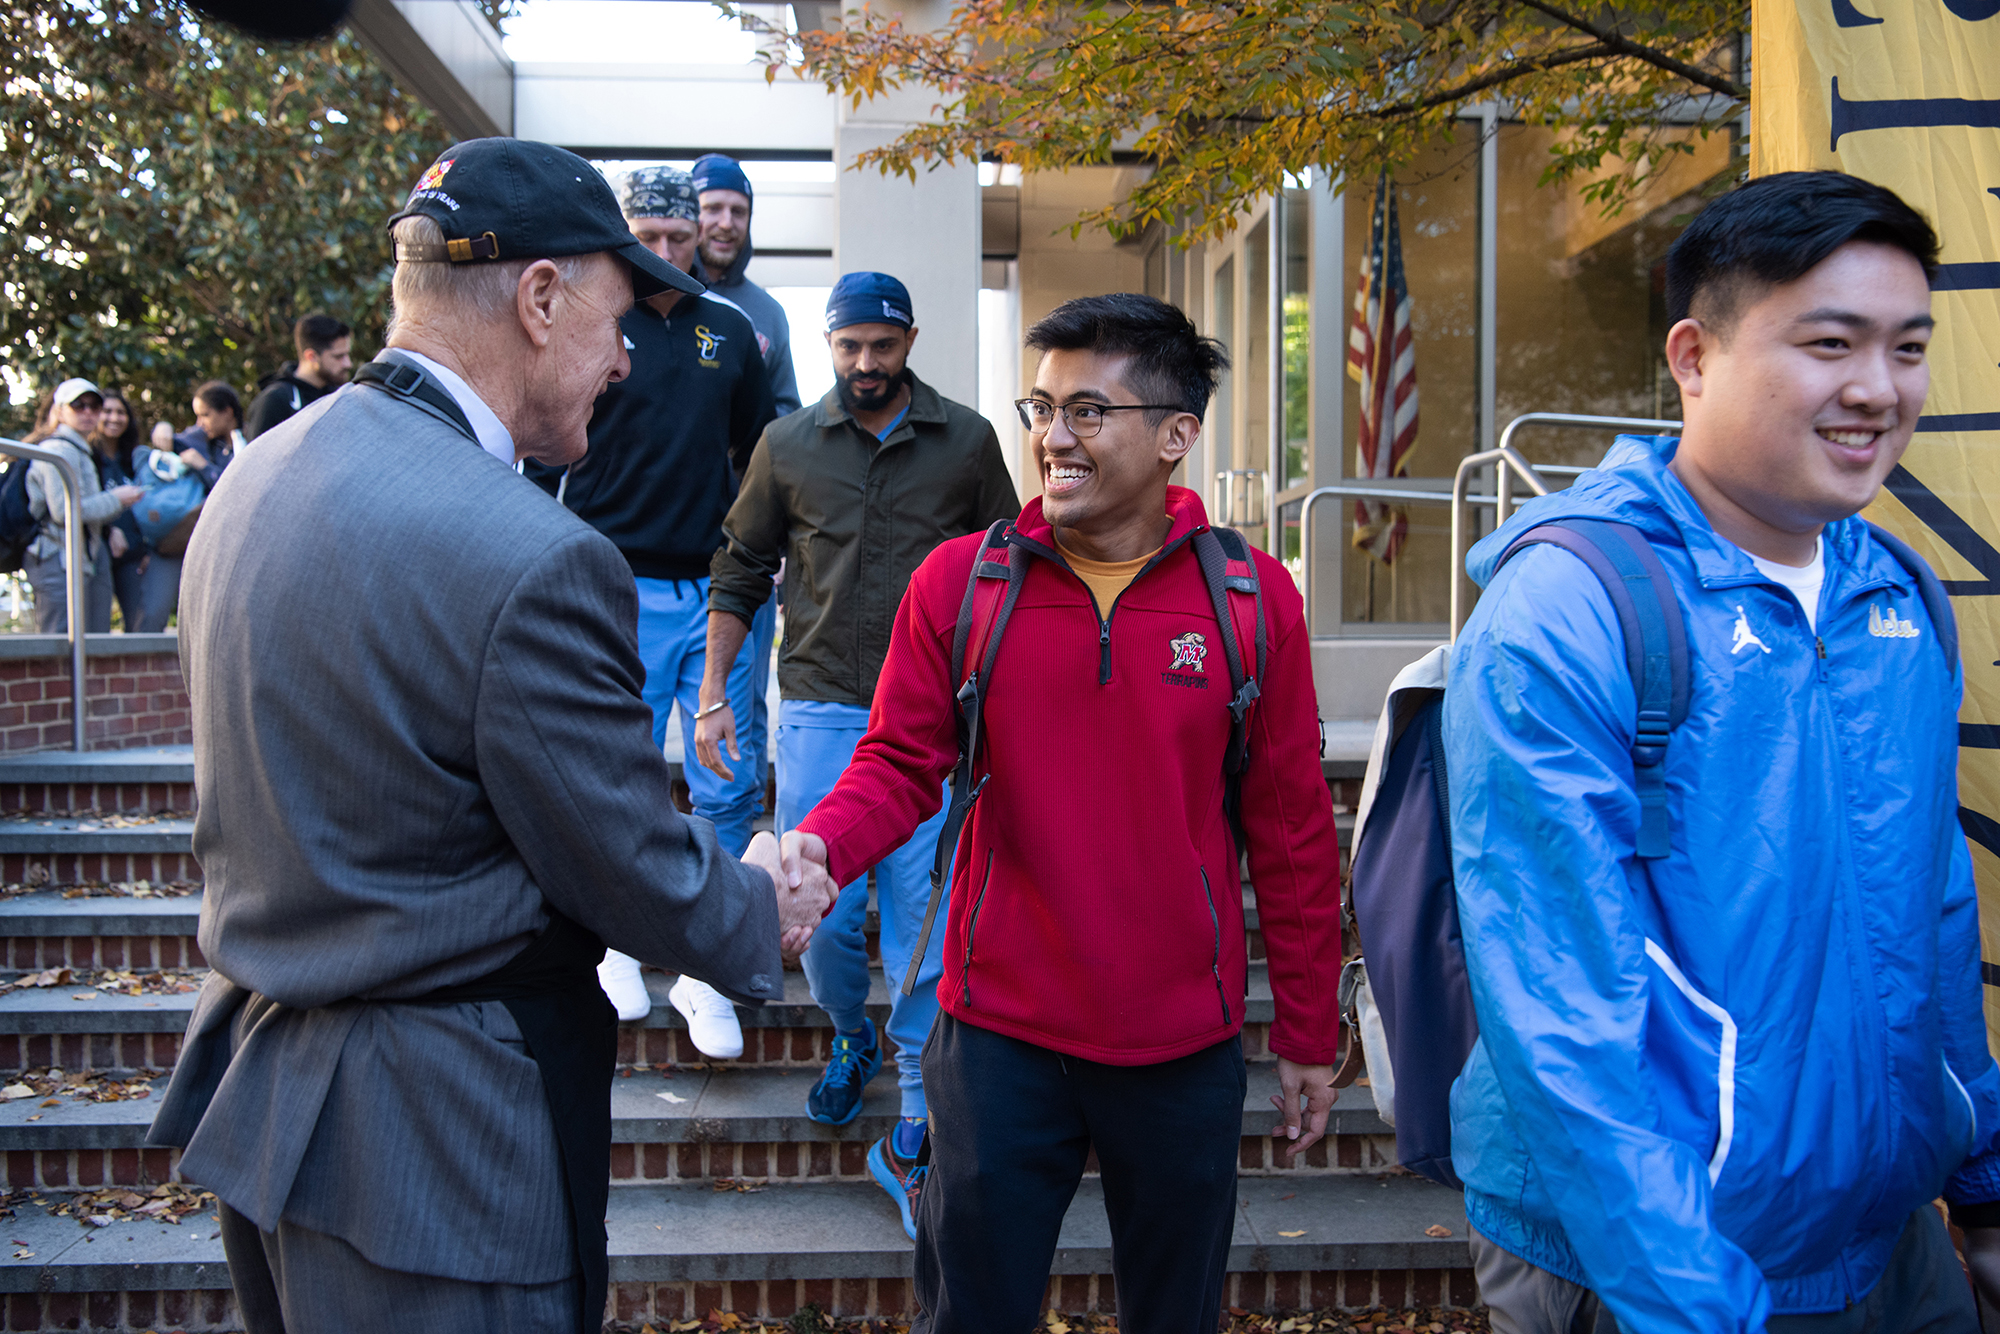 UMB President Bruce Jarrell greets some of the 600-plus students who attended the Founders Week Student Cookout on Oct. 27.